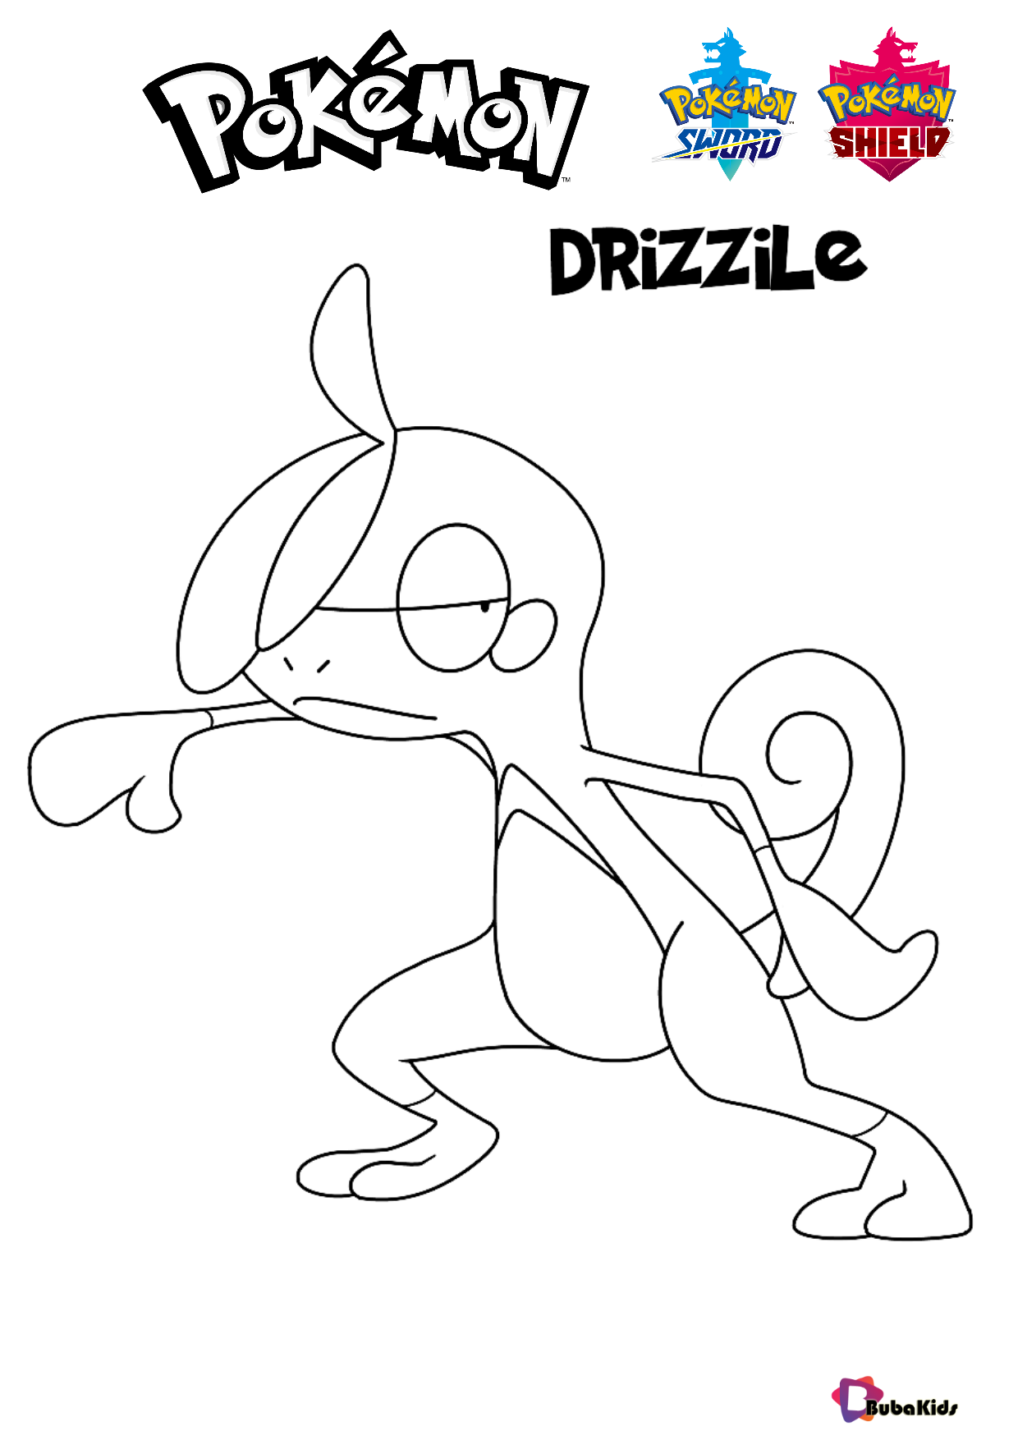 pokemon sword and shield pokemon drizzile coloring pages